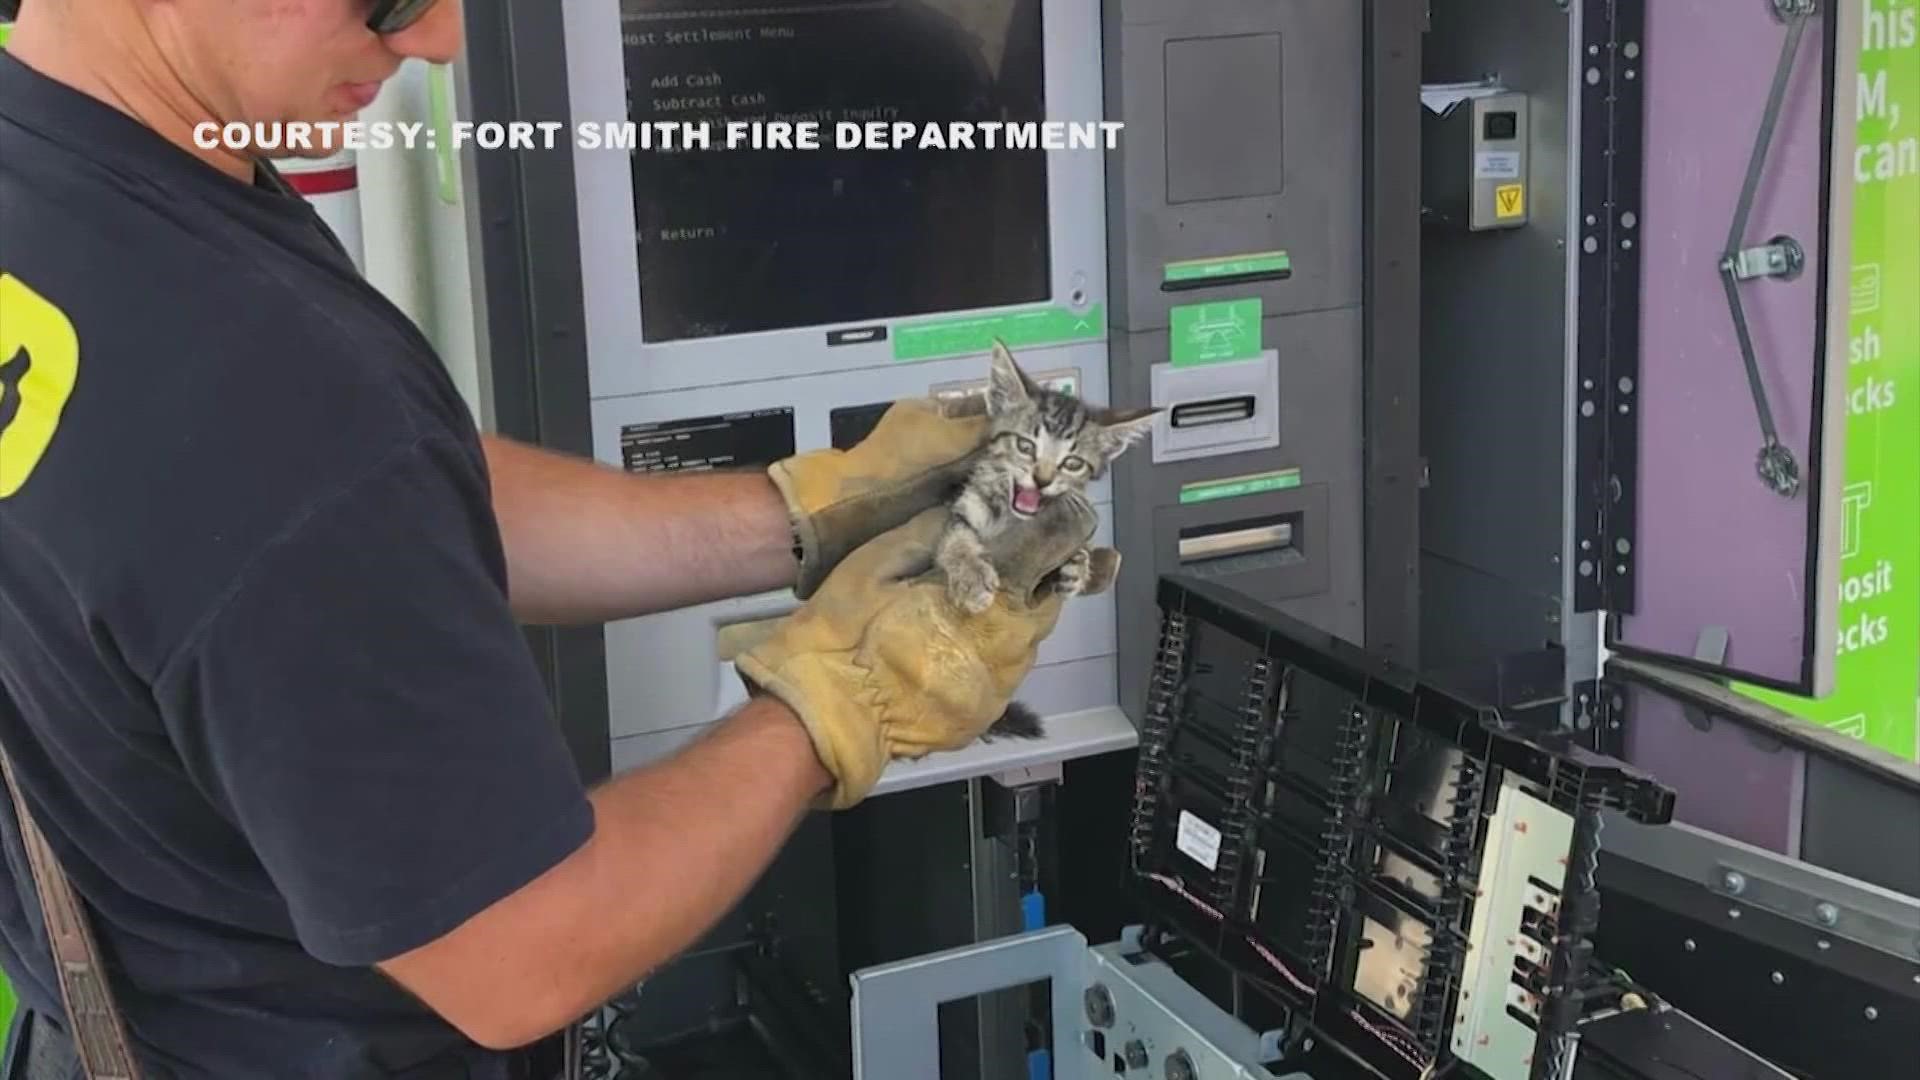 Jason Barron, an armed security guard for Looms Armored, found a kitten stuck inside an ATM during the middle of his shift.